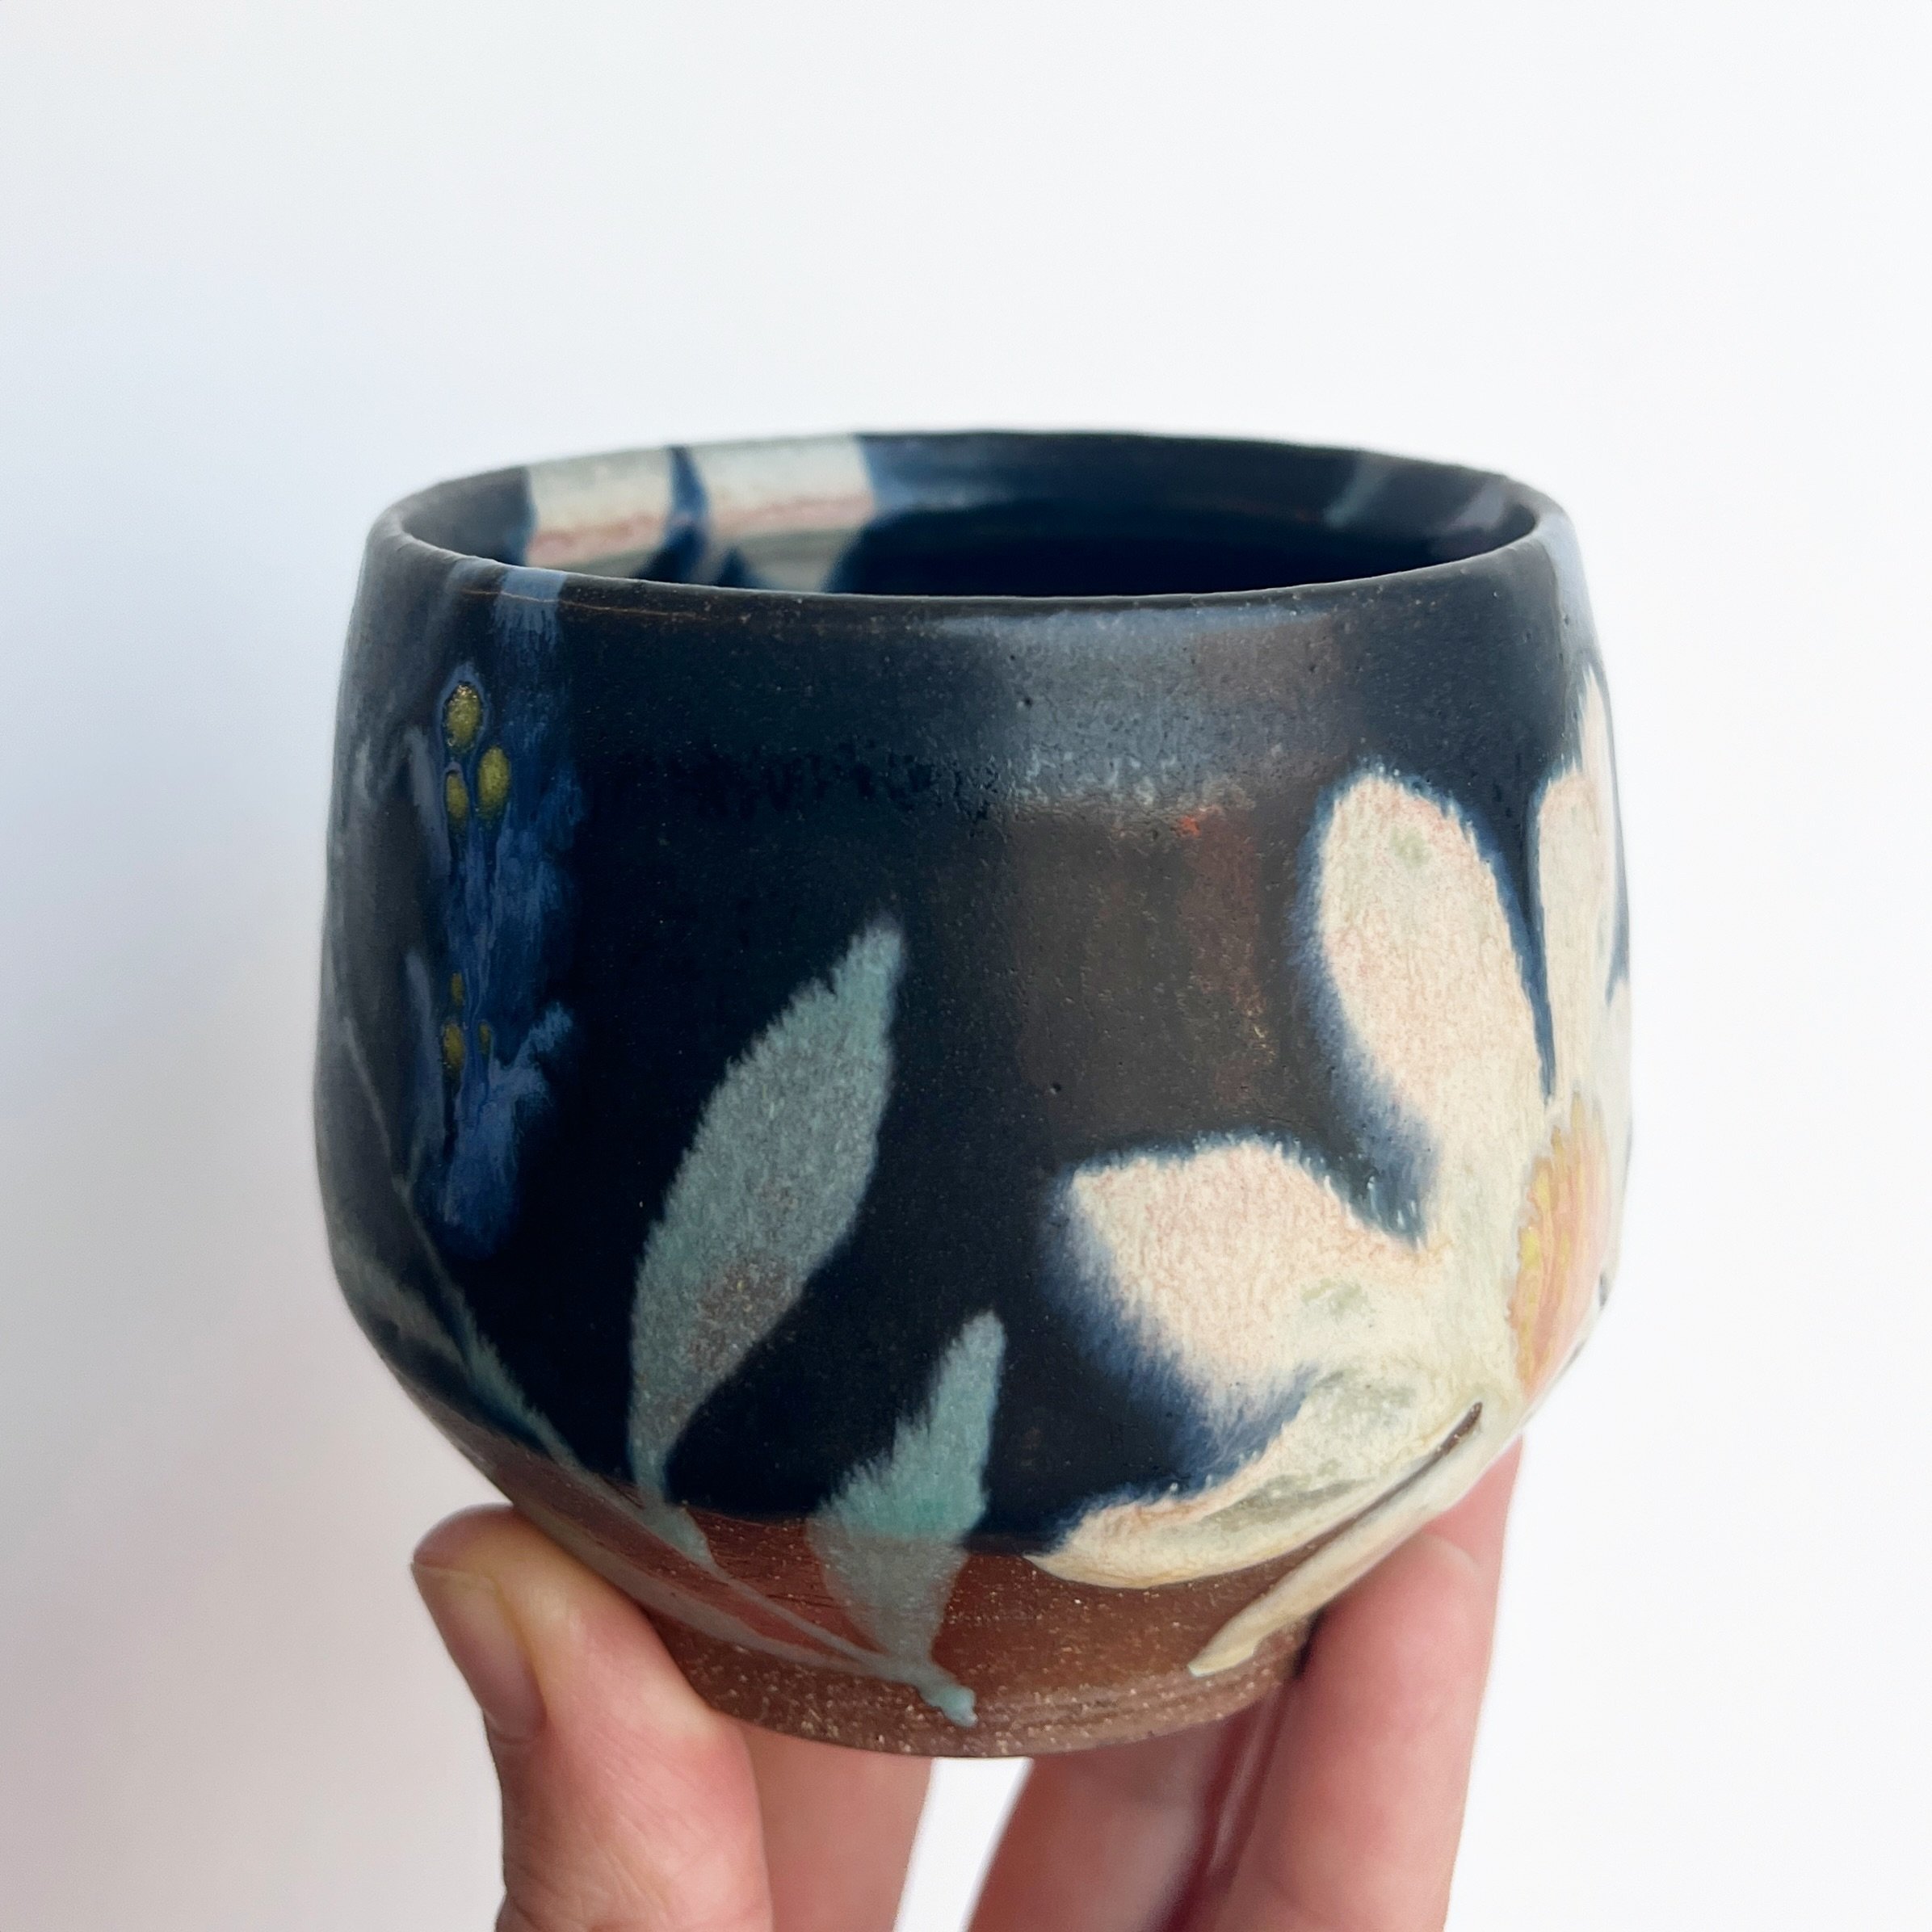 Imagine all the drinks you could enjoy in this! I will be adding some new work to my online shop this Saturday at 12pm (est) including a handful of these small cups. 

#rutheasterbrookceramics #yunomi #handmadeceramiccup #potteryaslivingart #glazeapp